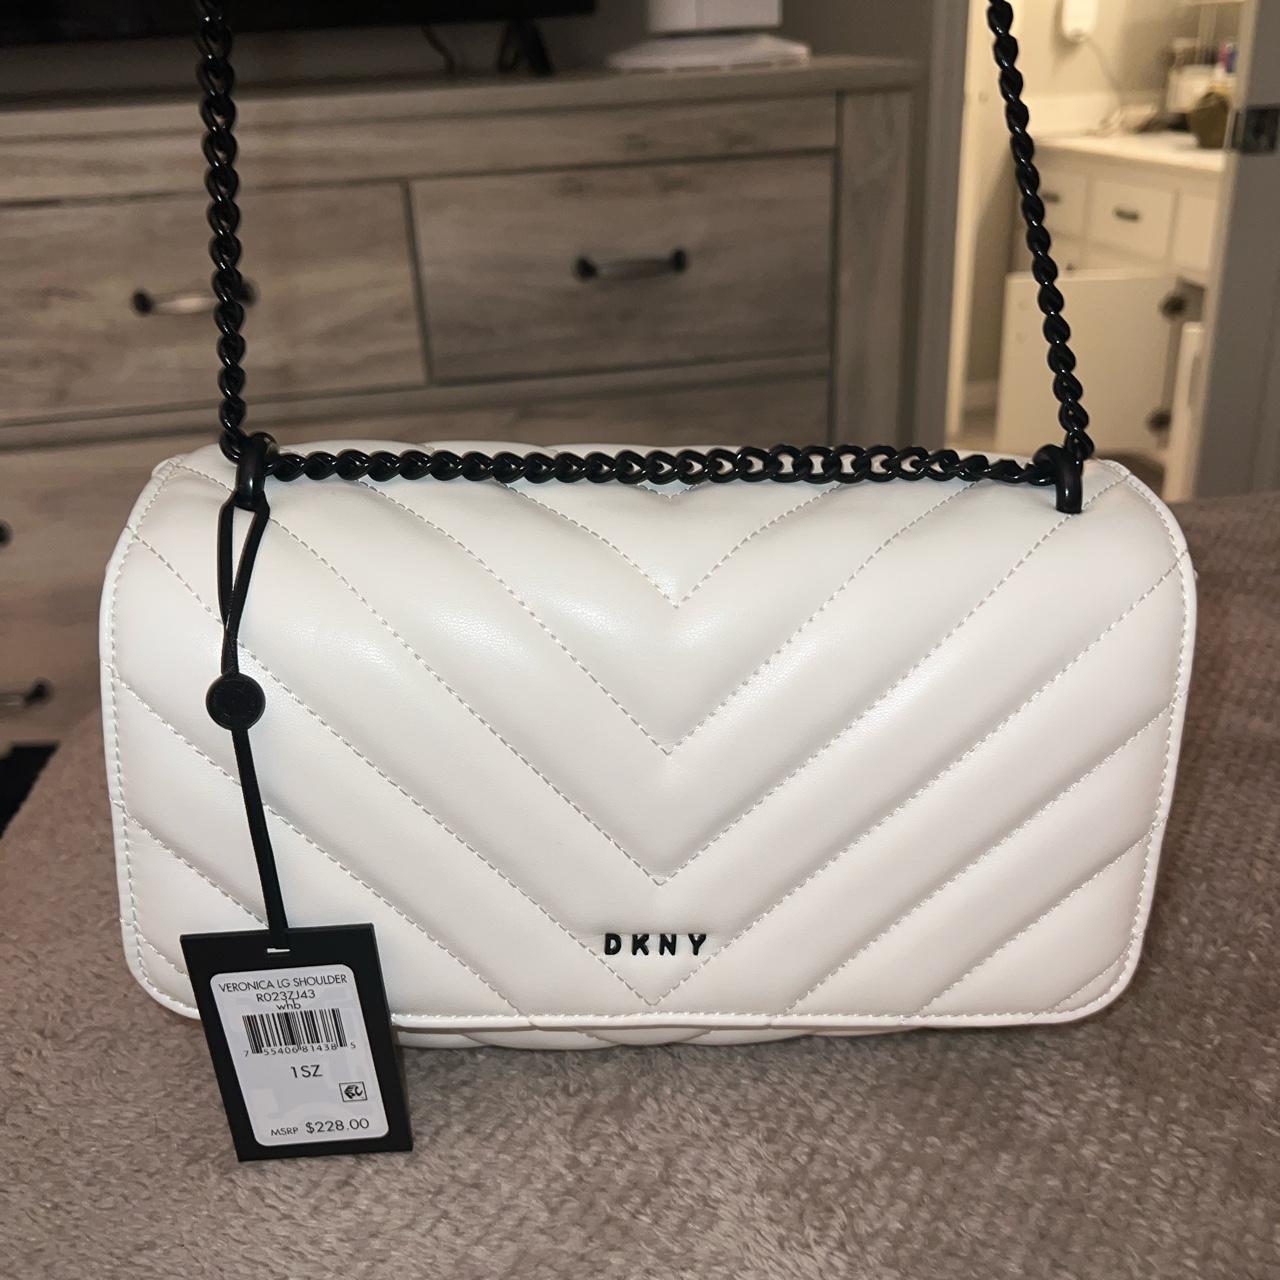 Brand new black and white cross body DKNY bag with - Depop